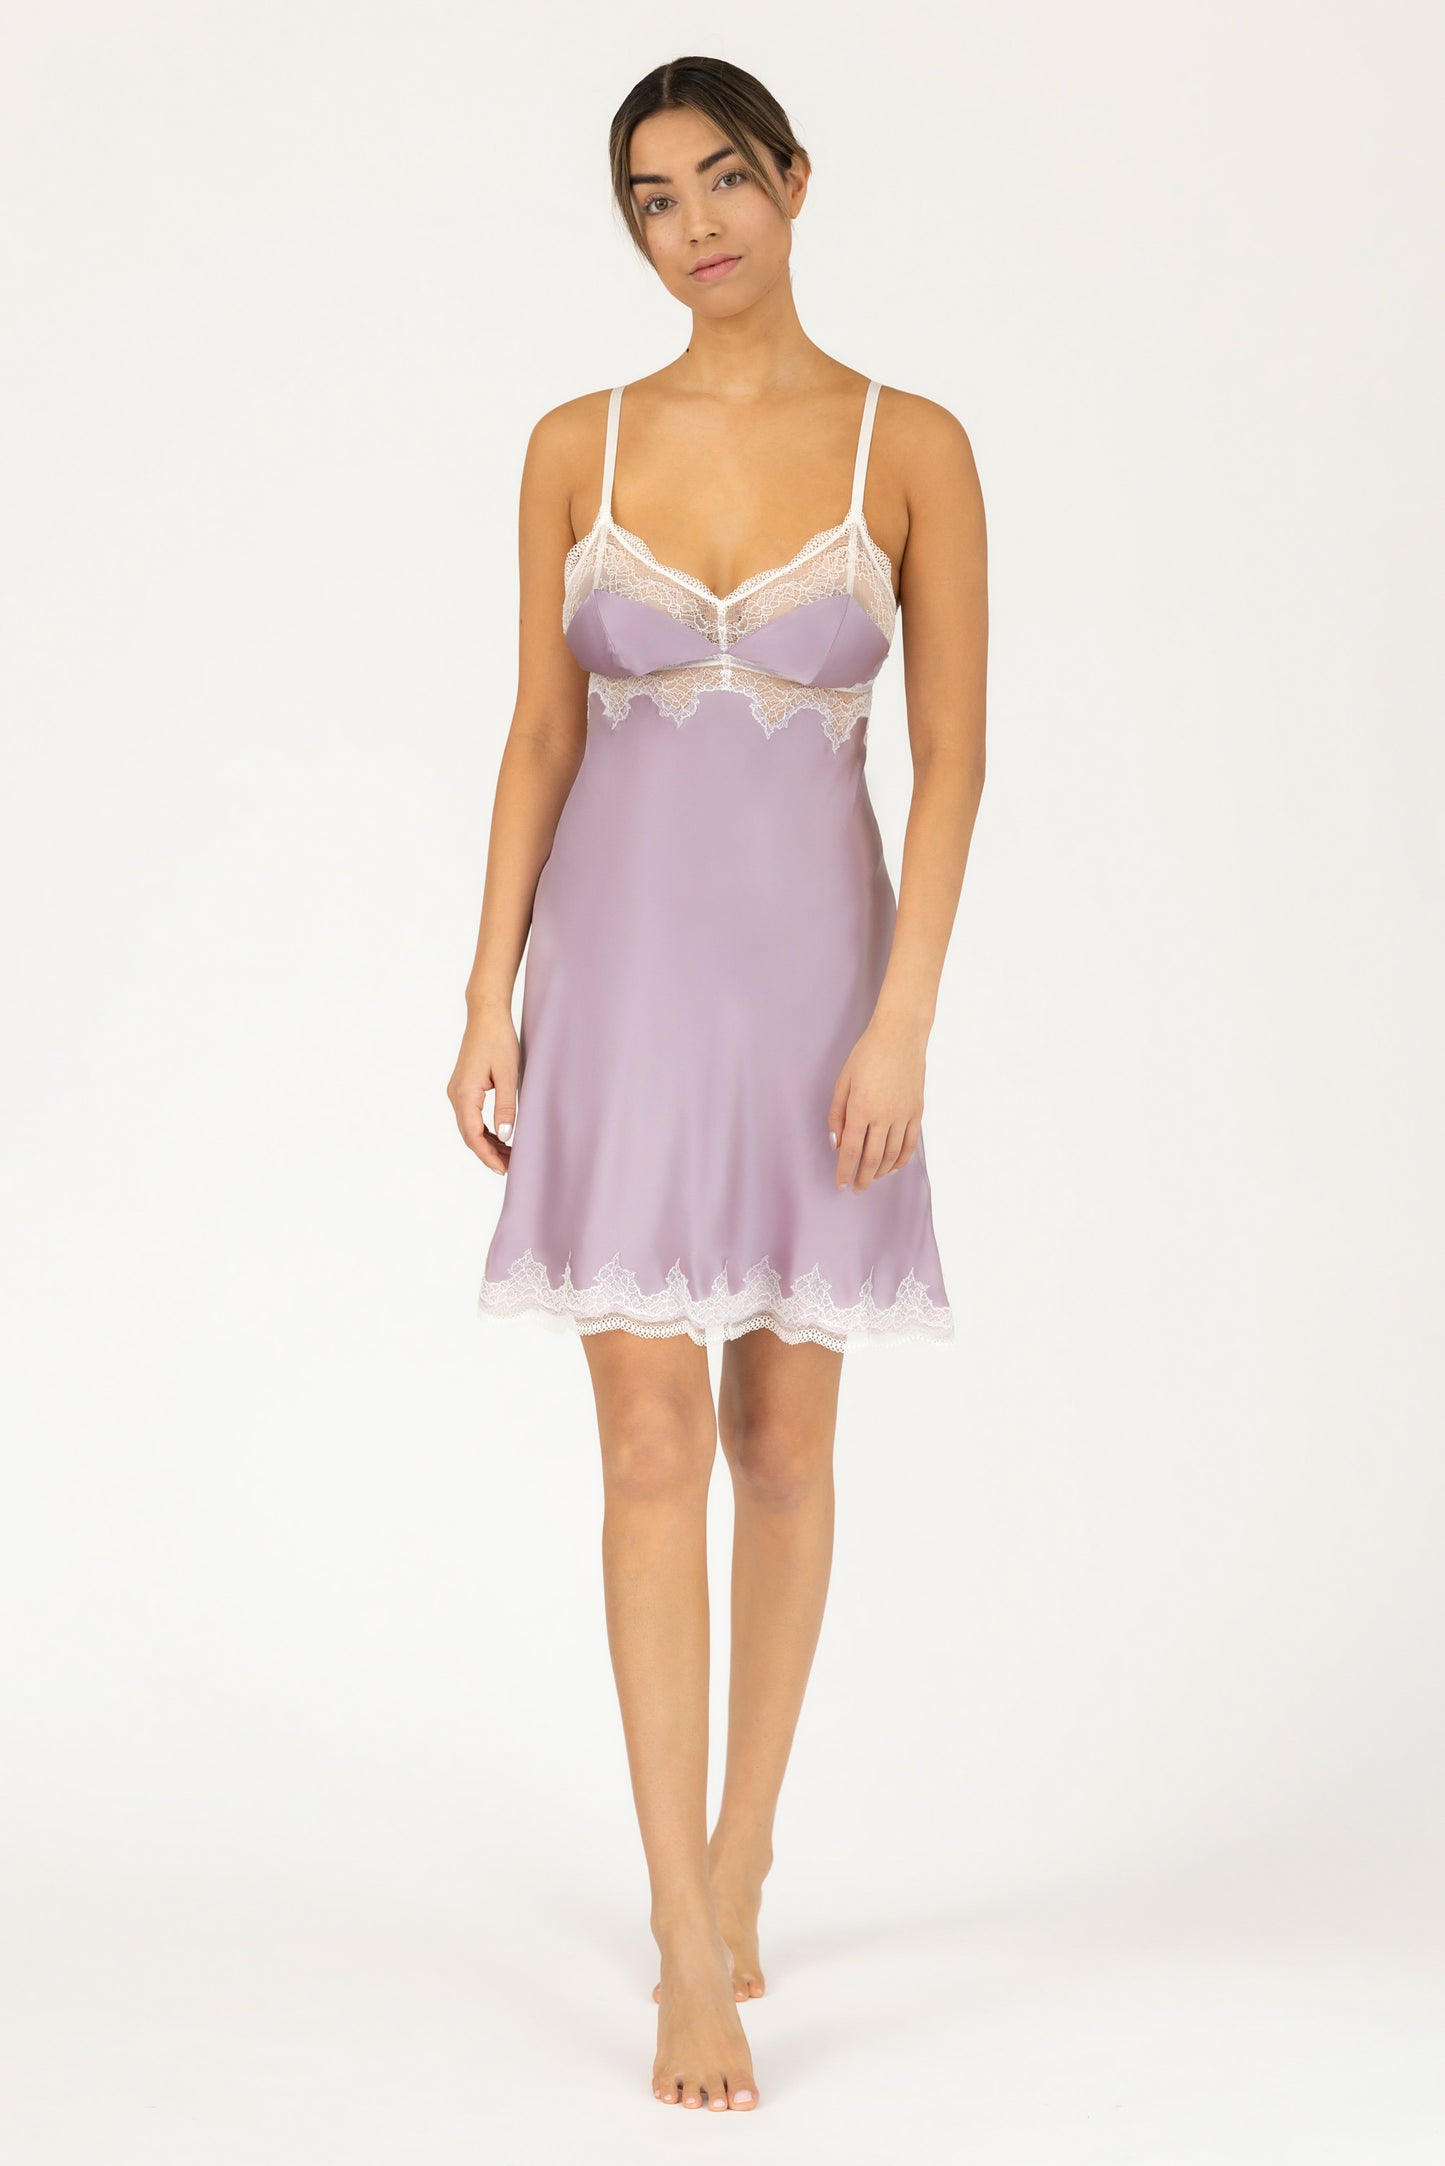 Allegra Soulful Bust-Support Silk Chemise